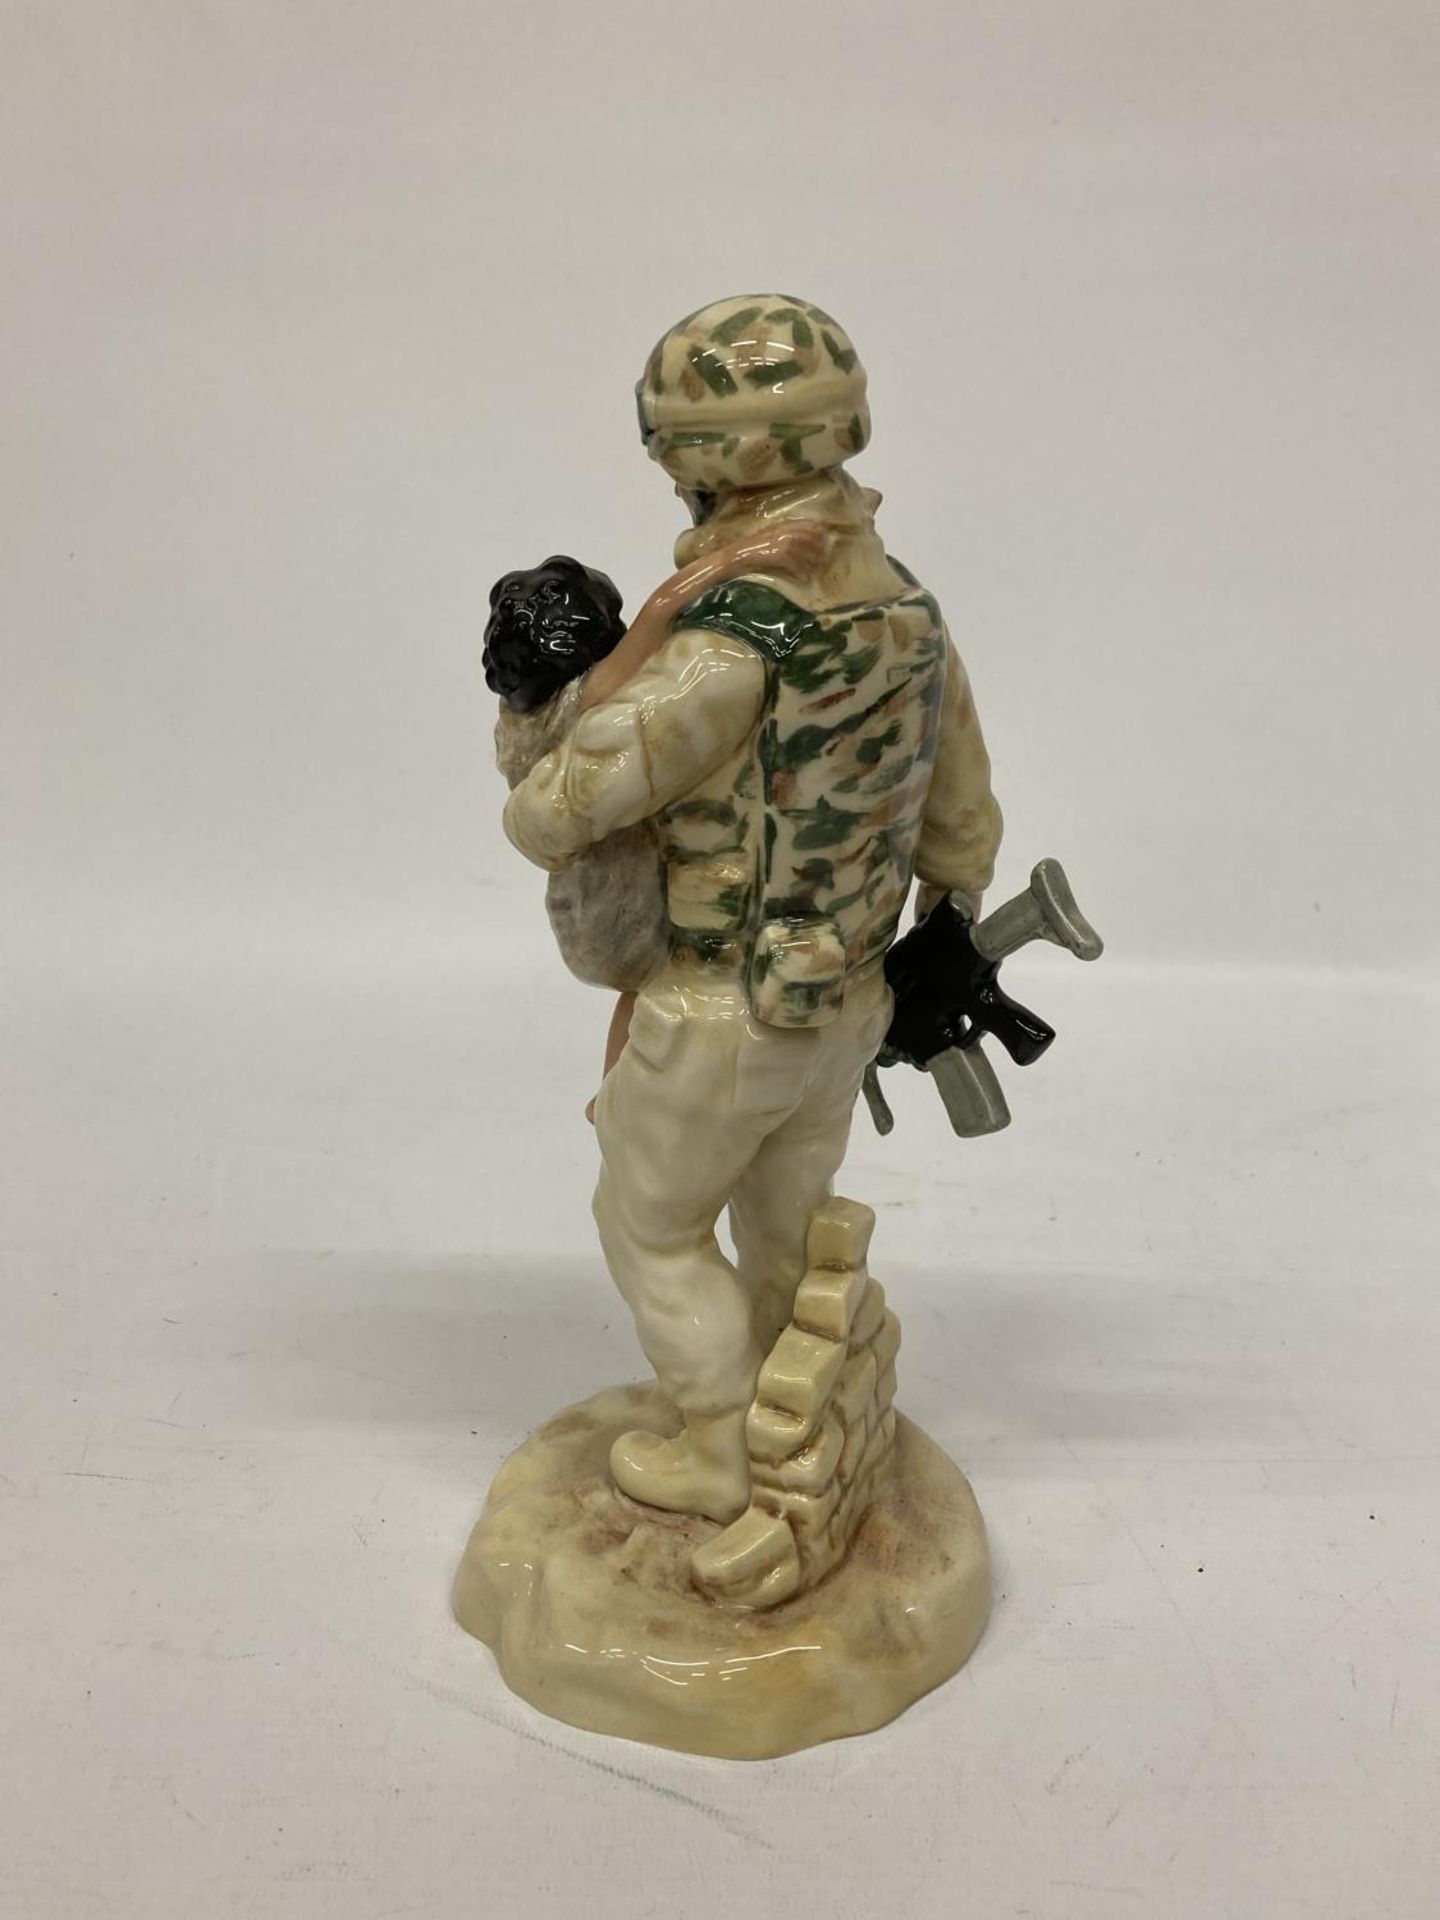 A CERAMIC SCULPTURE BY PEGGY DAVIES "IN THE ARMS OF A HERO" MODELLED BY ANDY MOSS - LIMITED - Image 4 of 5